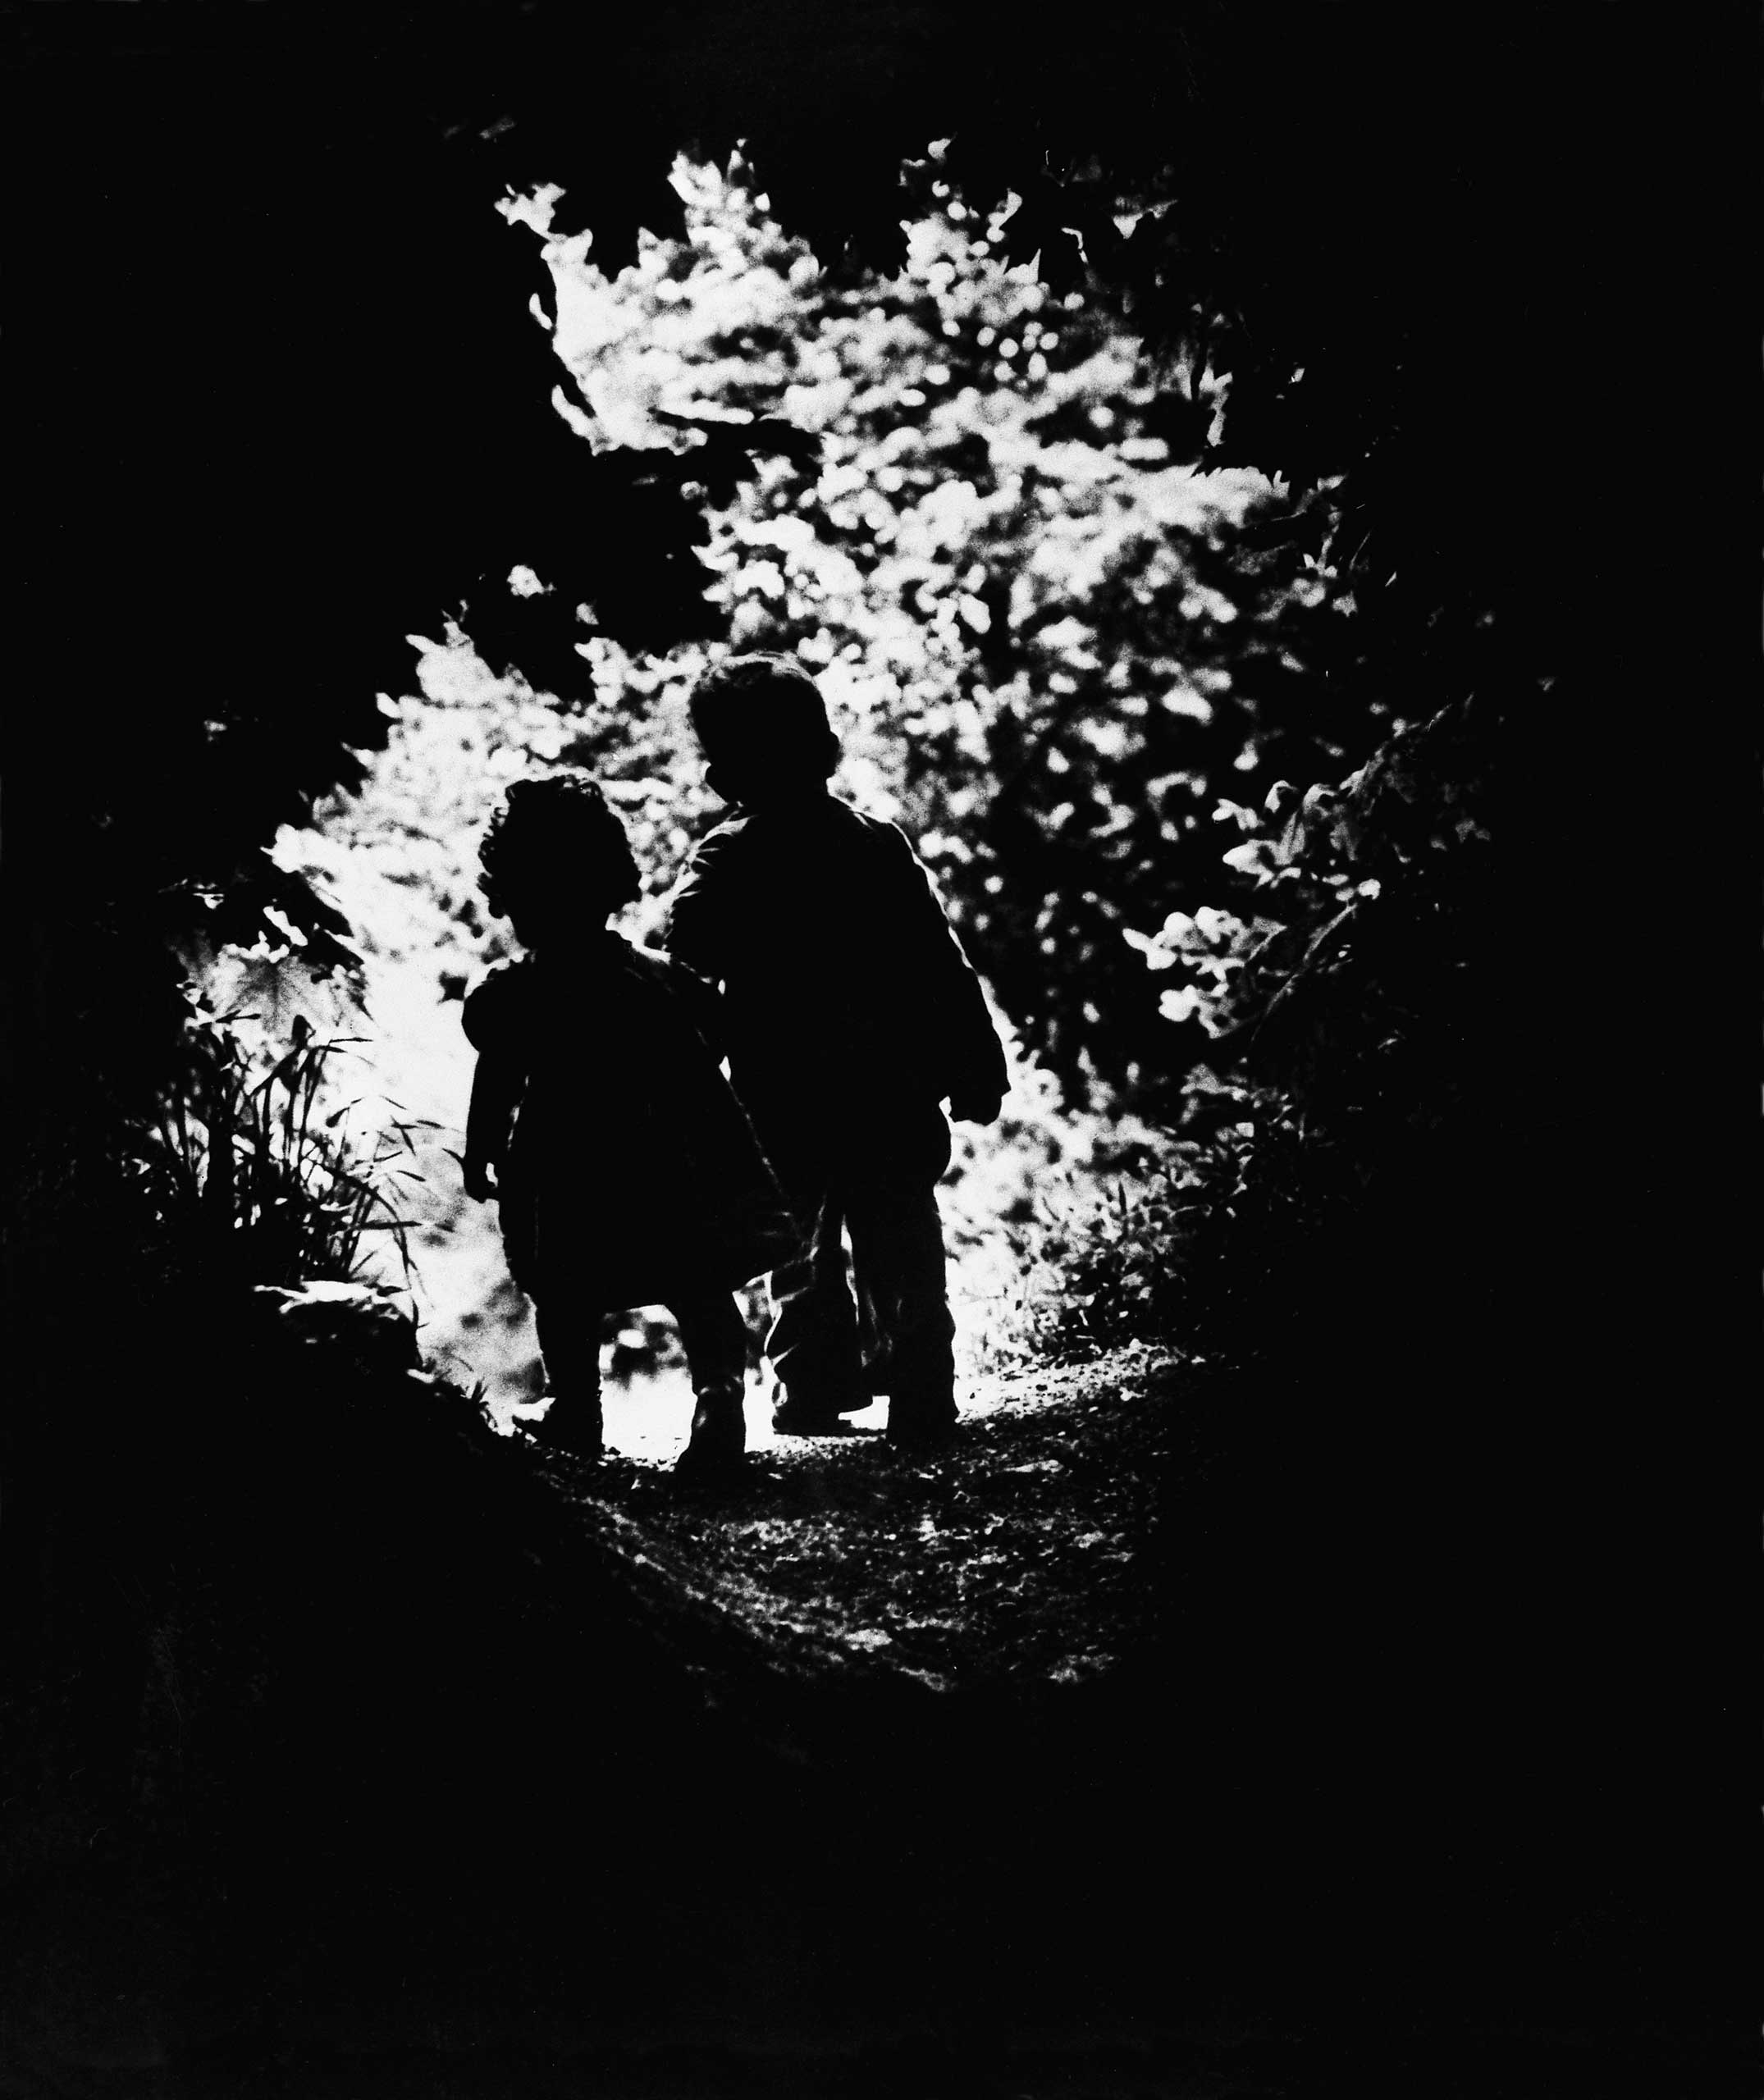 LIFE photographer W. Eugene Smith's children, Juanita and Patrick, walk hand-in-hand into a clearing in 1946. The photo was the closing image in Edward Steichen's now-legendary 1955 MoMA exhibition, The Family of Man, and was one of the very first that Smith, wounded while working in the Pacific in World War II, made after the war.